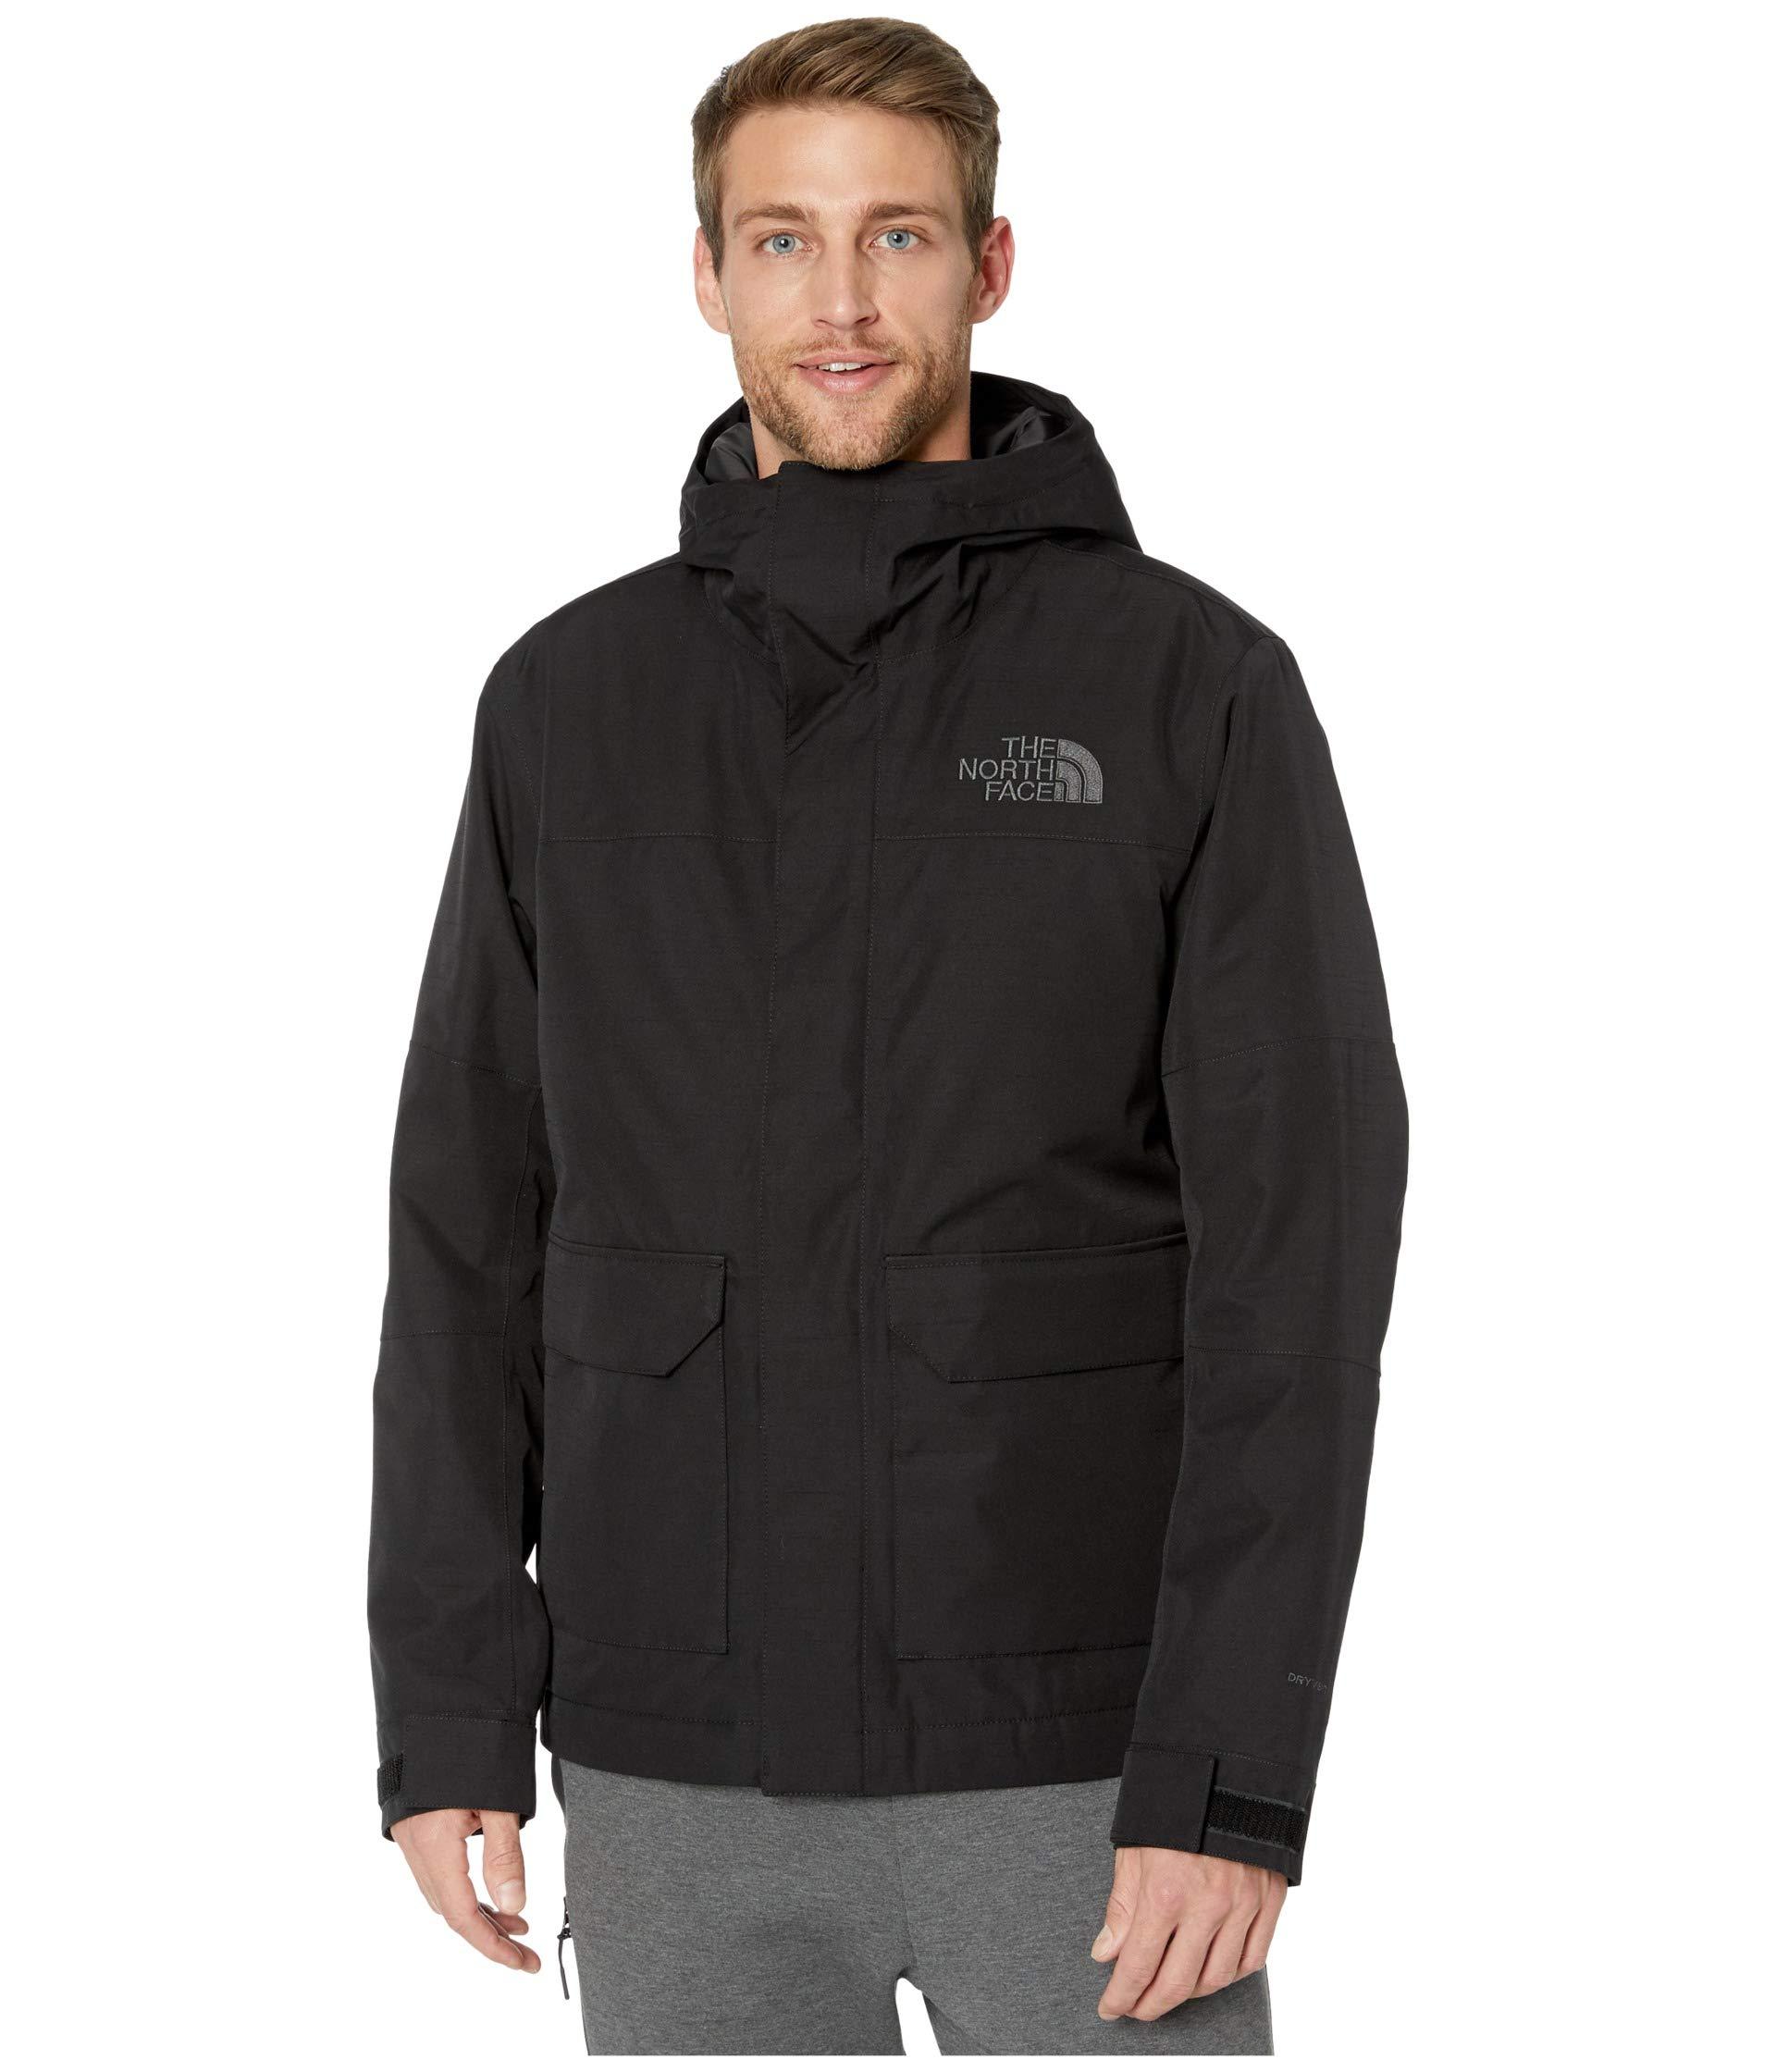 The North Face Synthetic Cypress Insulated Jacket in Black for Men - Lyst